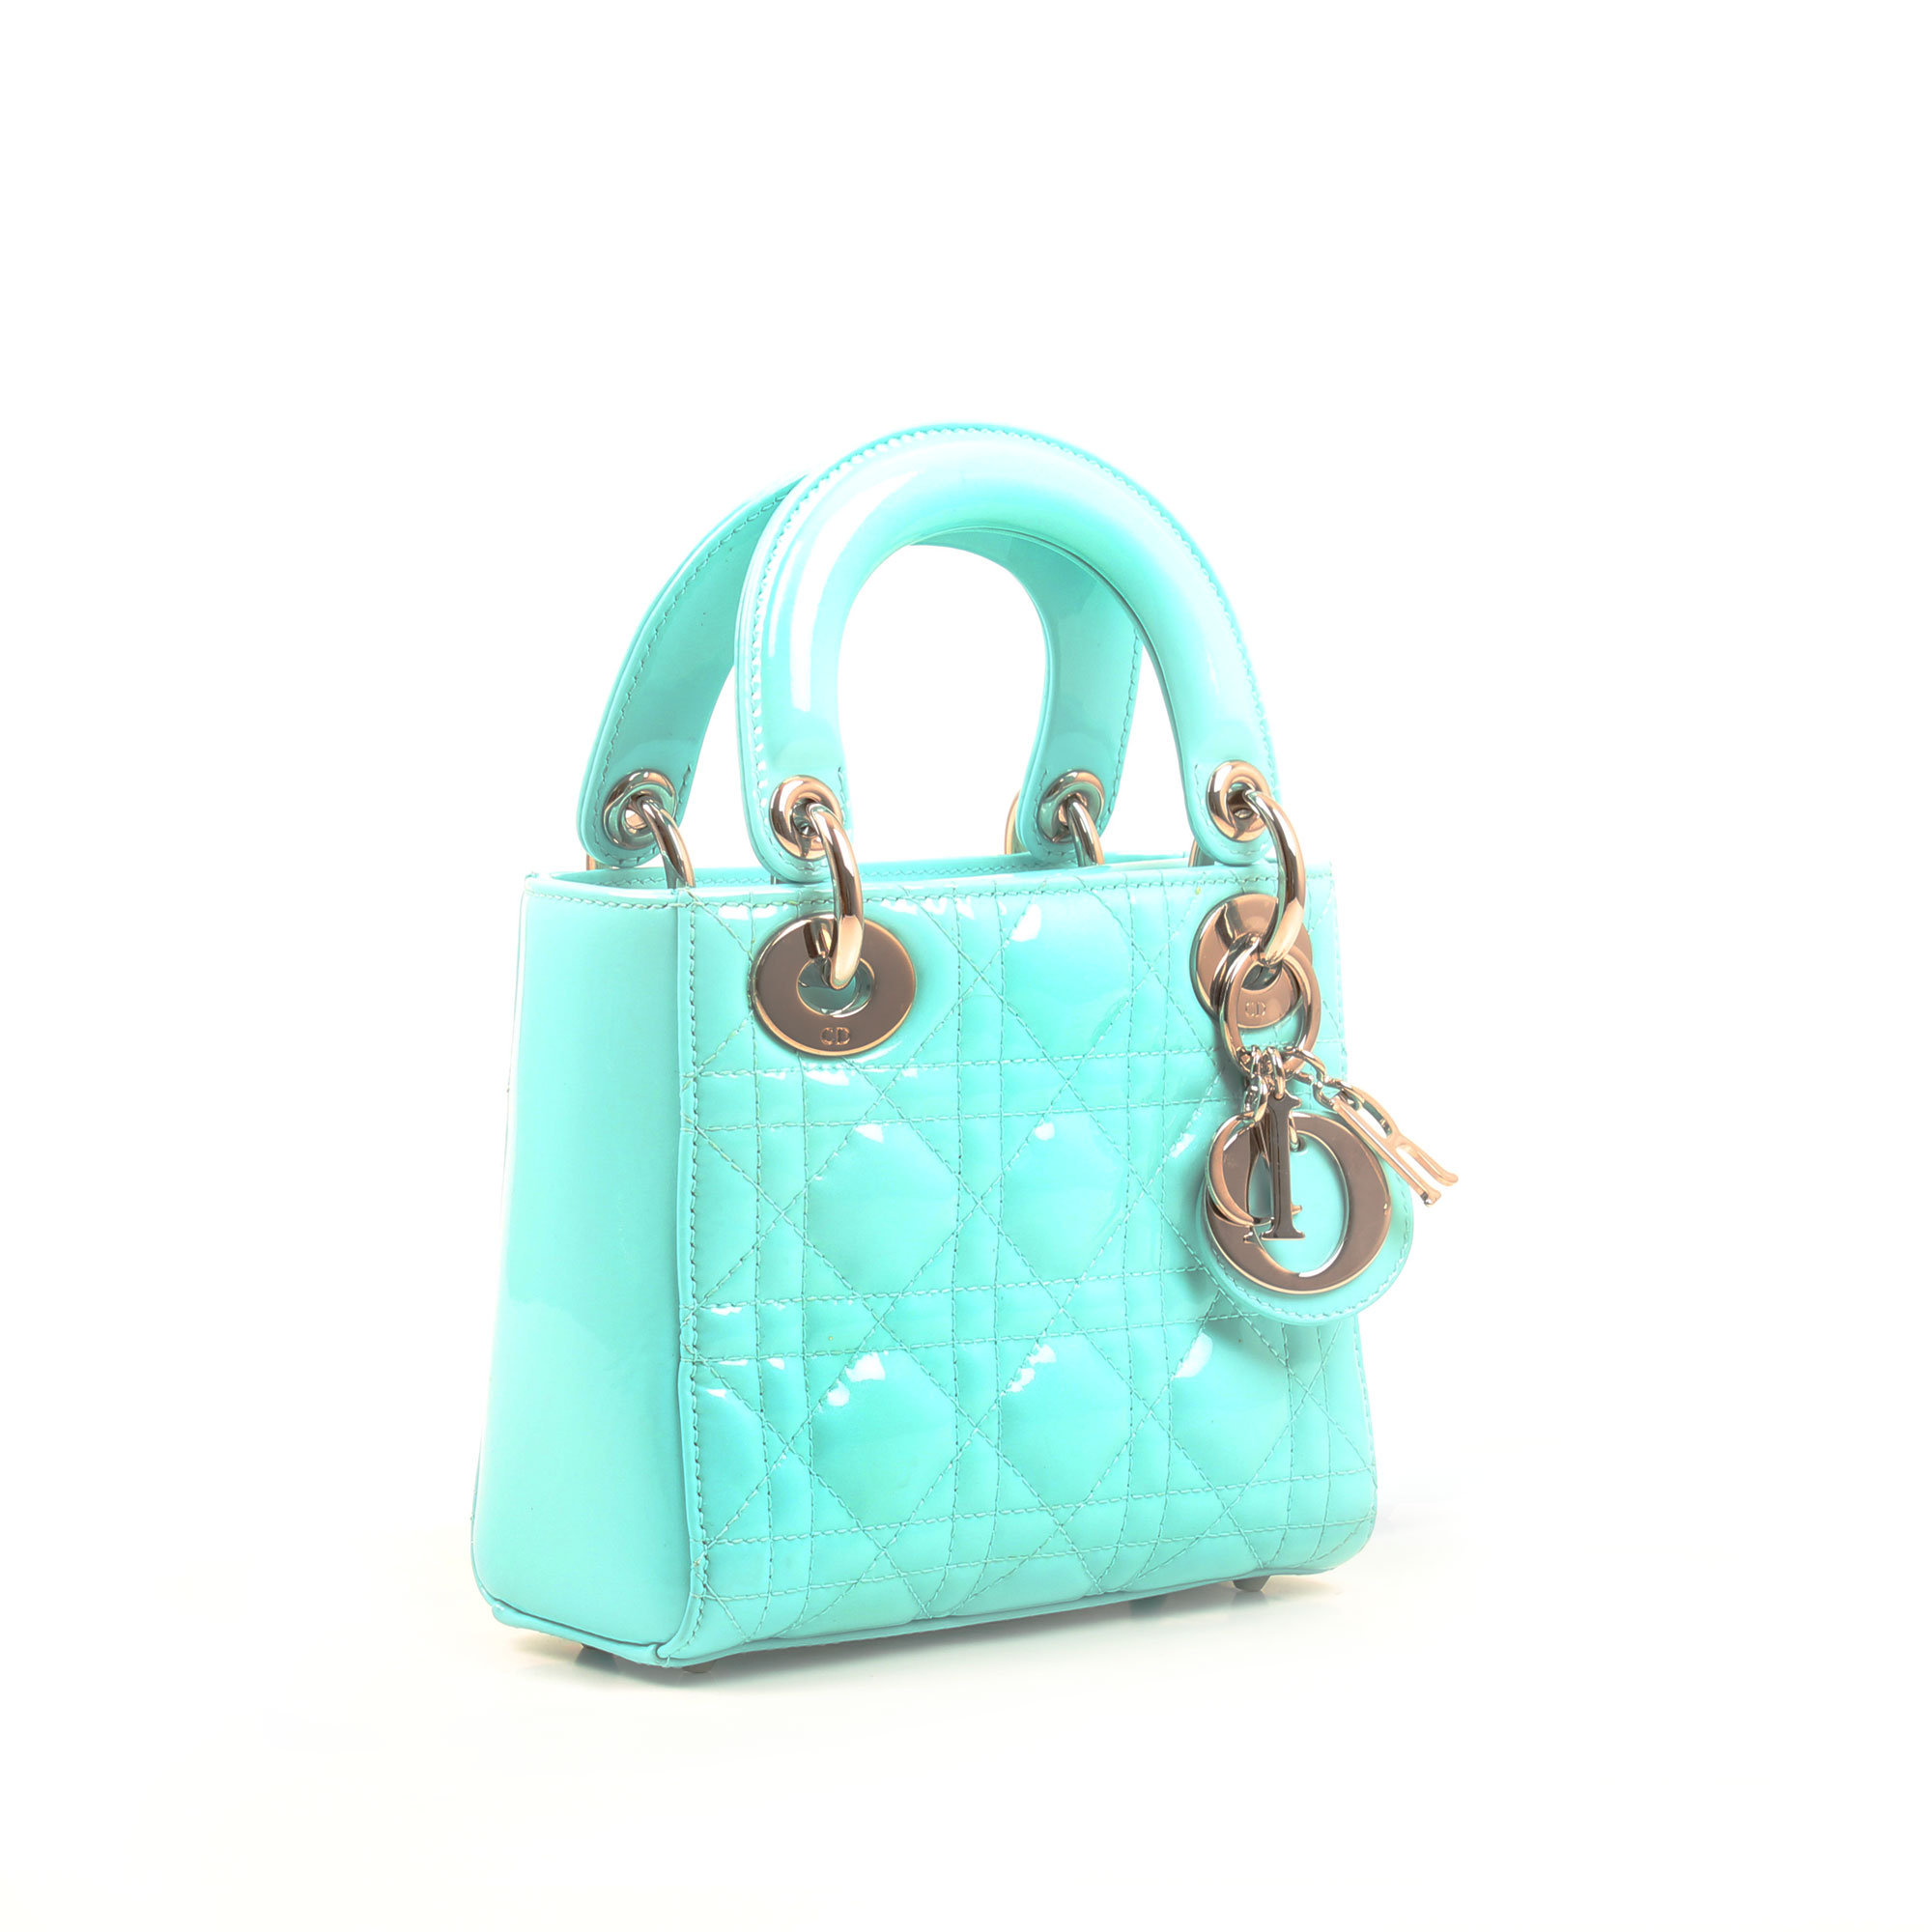 General image of dior mini lady dior bag patent blue leather